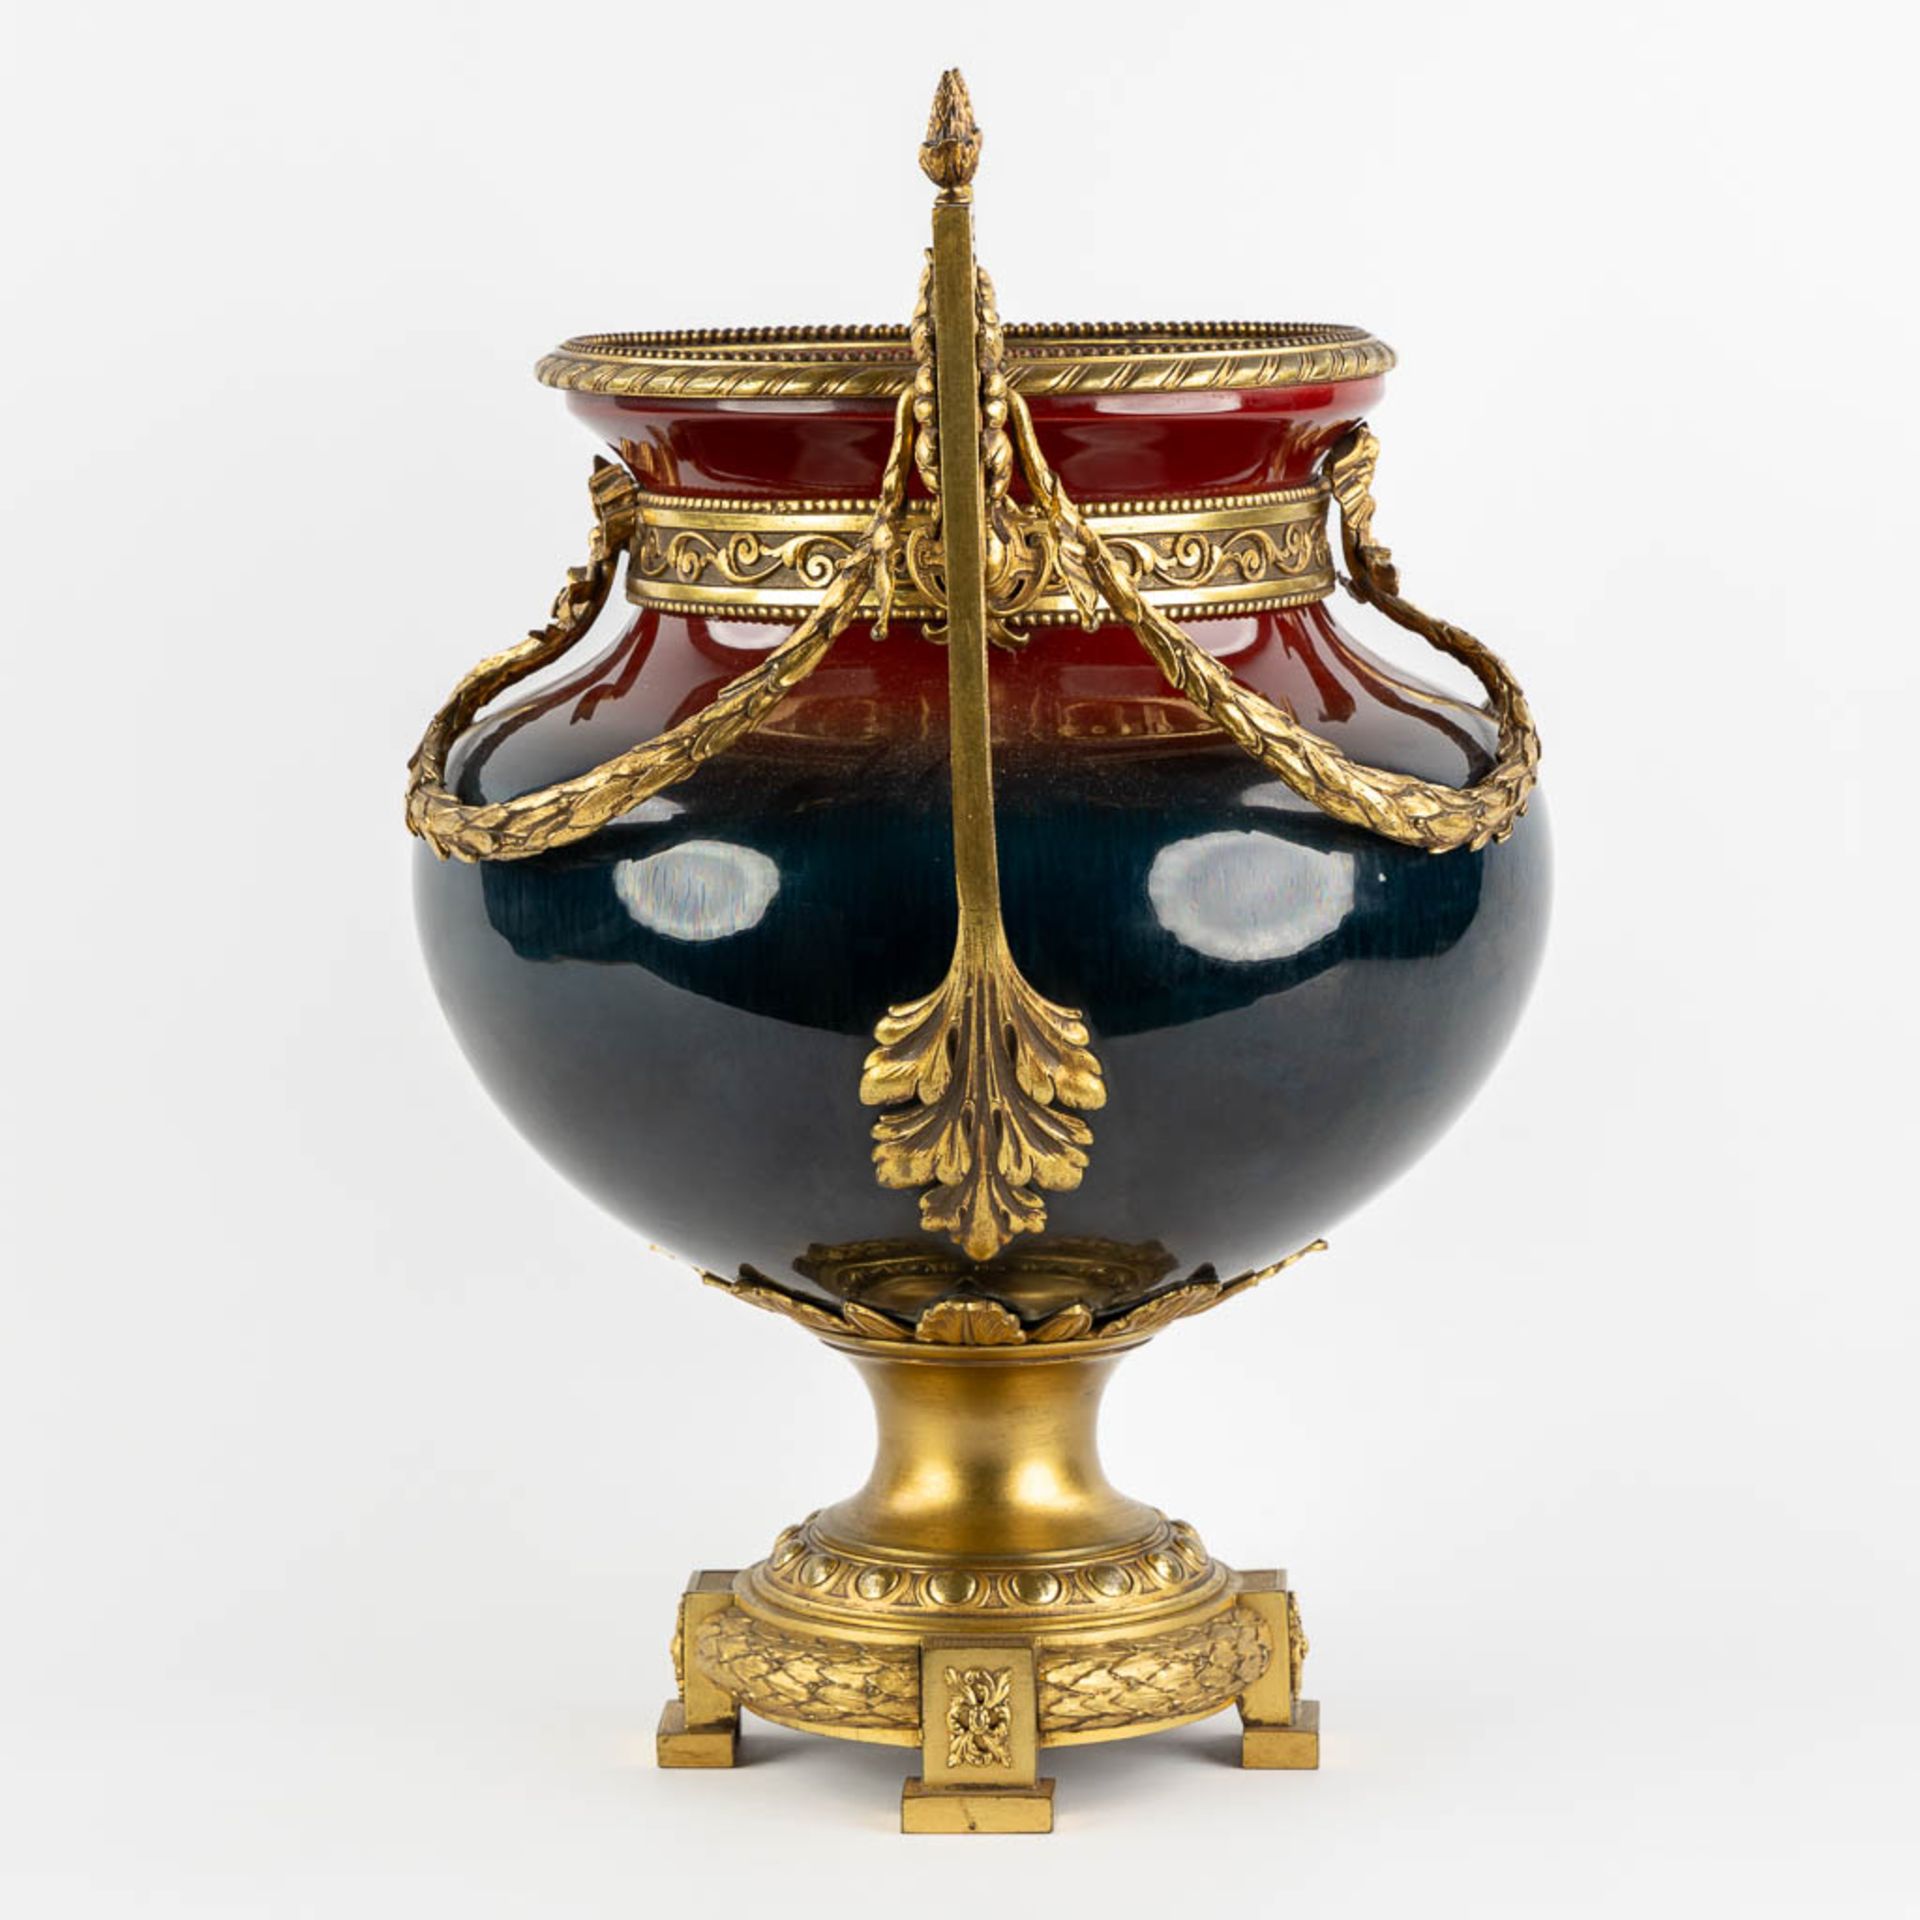 A large faience vase mounted with gilt bronze in Louis XV style. Circa 1900. (L:34 x W:40 x H:50 cm) - Image 4 of 12